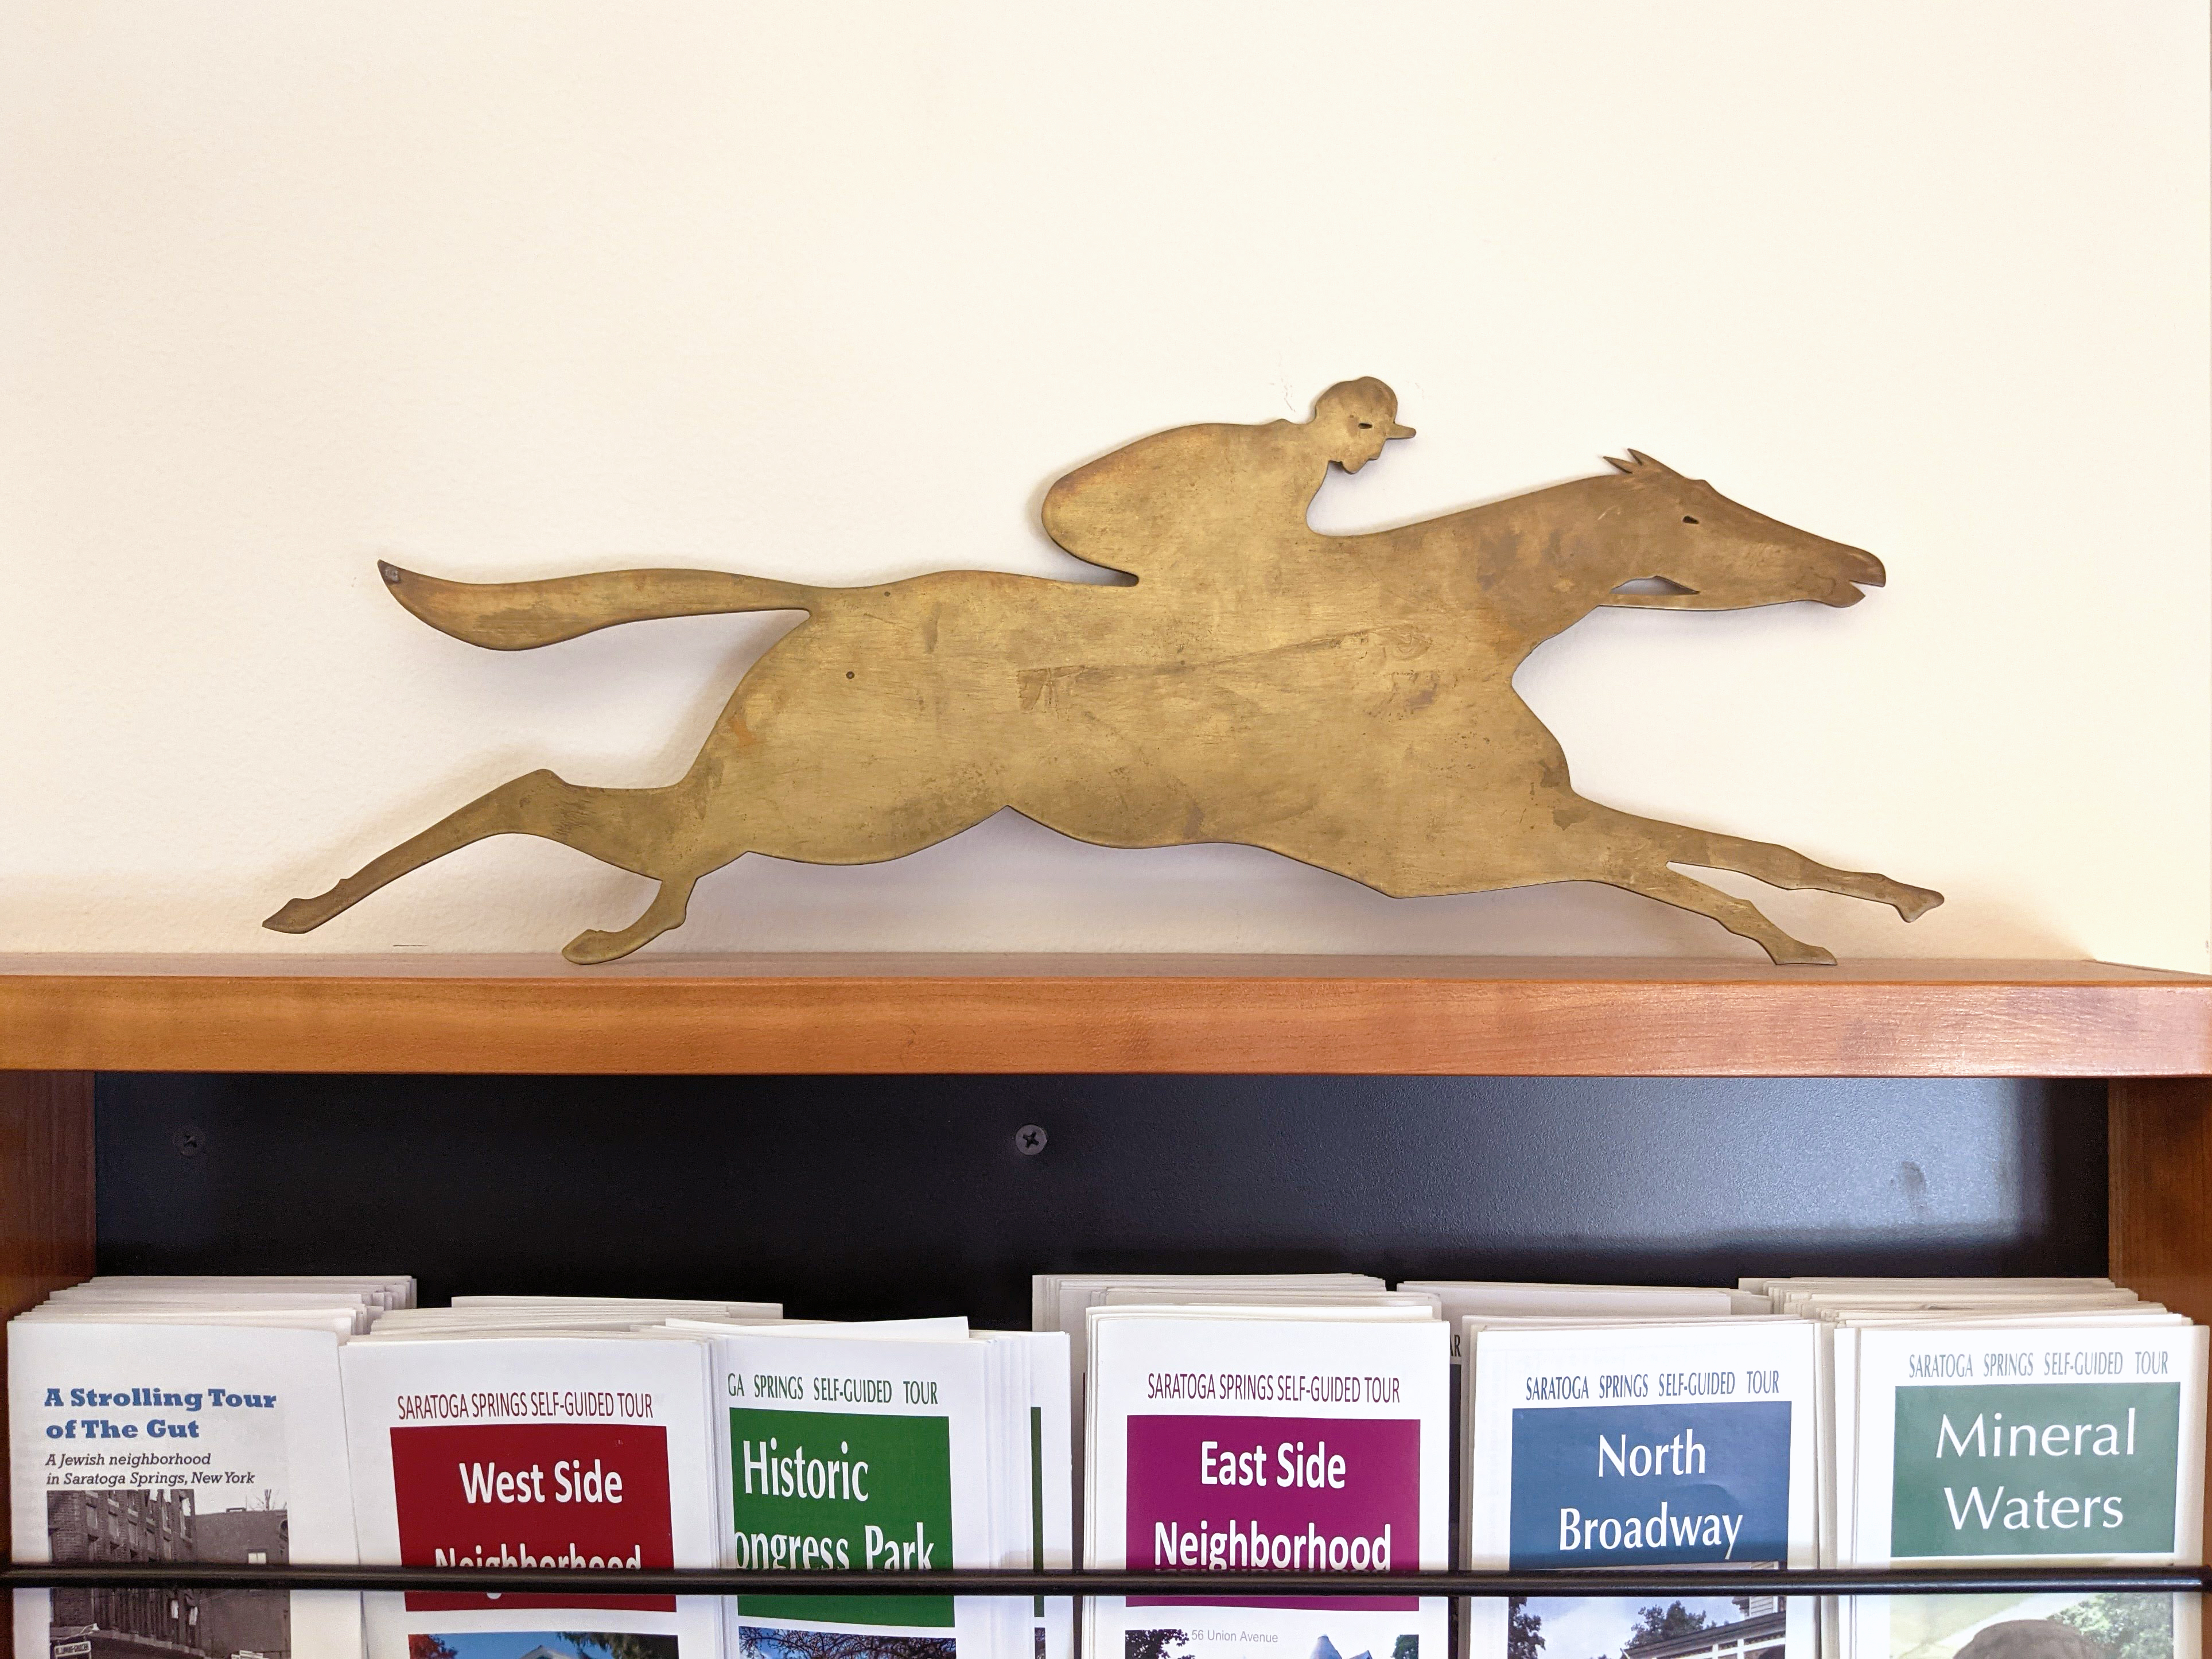 Bronze-like placque of a jockey riding a thoroughbred to grab attention, laid atop a display case to provide trifold printed pamphlets for self-guided tours.